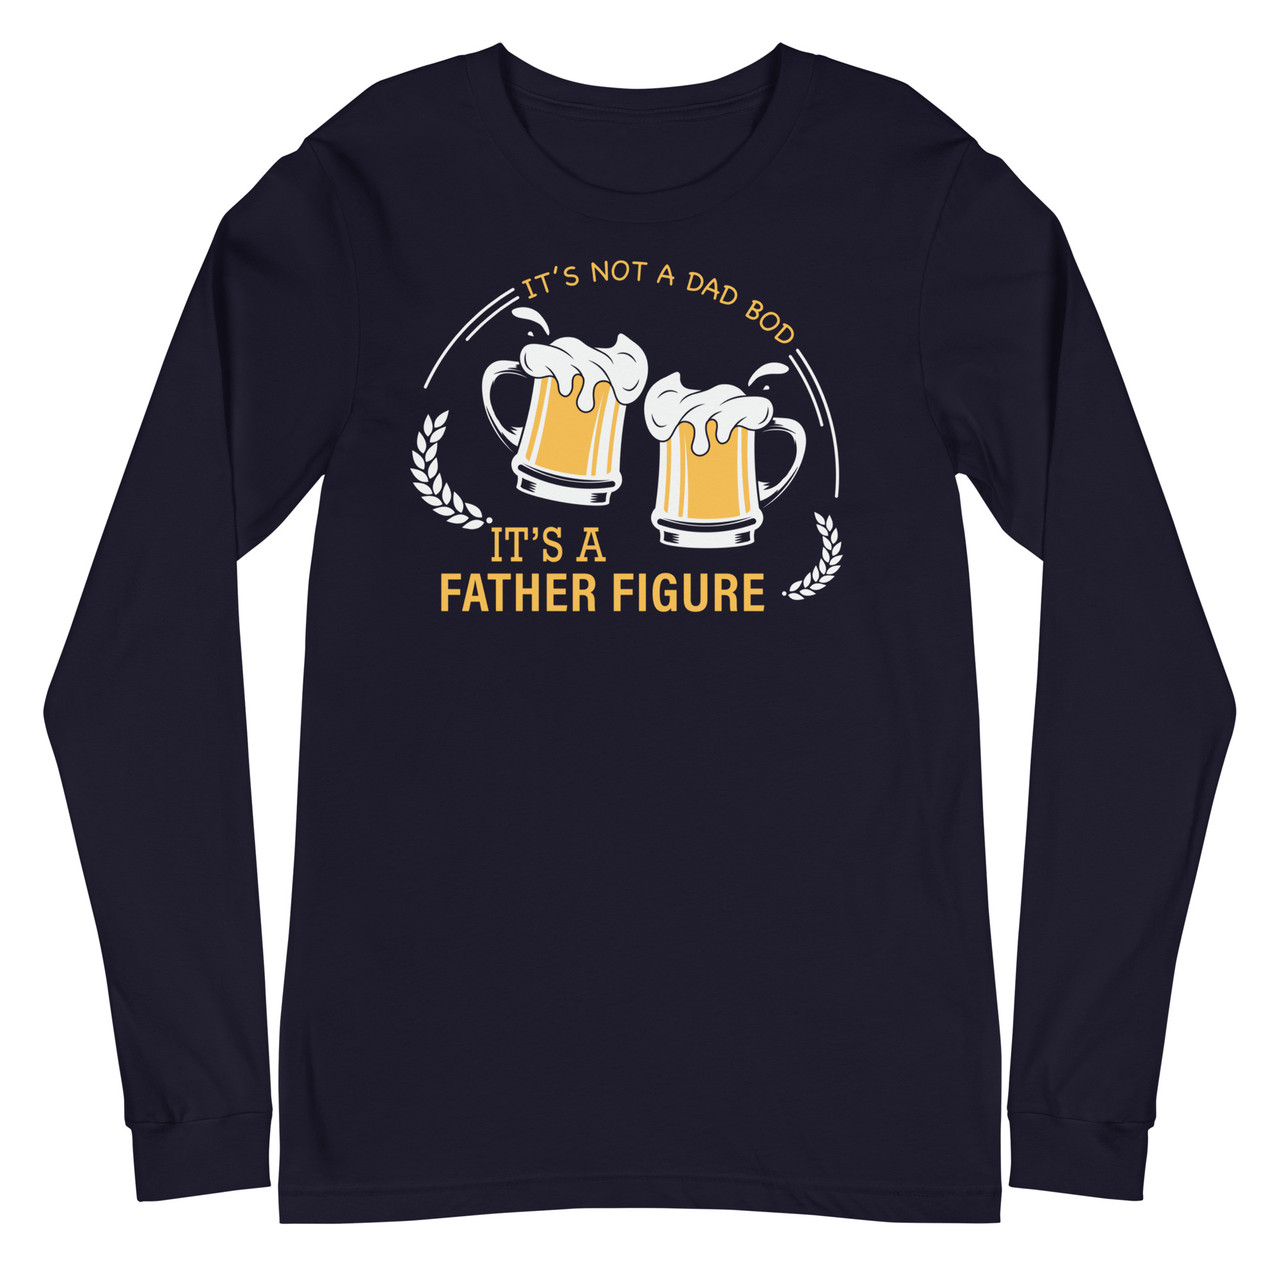 It's Not A Dad's Bod, It's A Father Figure Unisex Long Sleeve Tee - Bella + Canvas 3501 